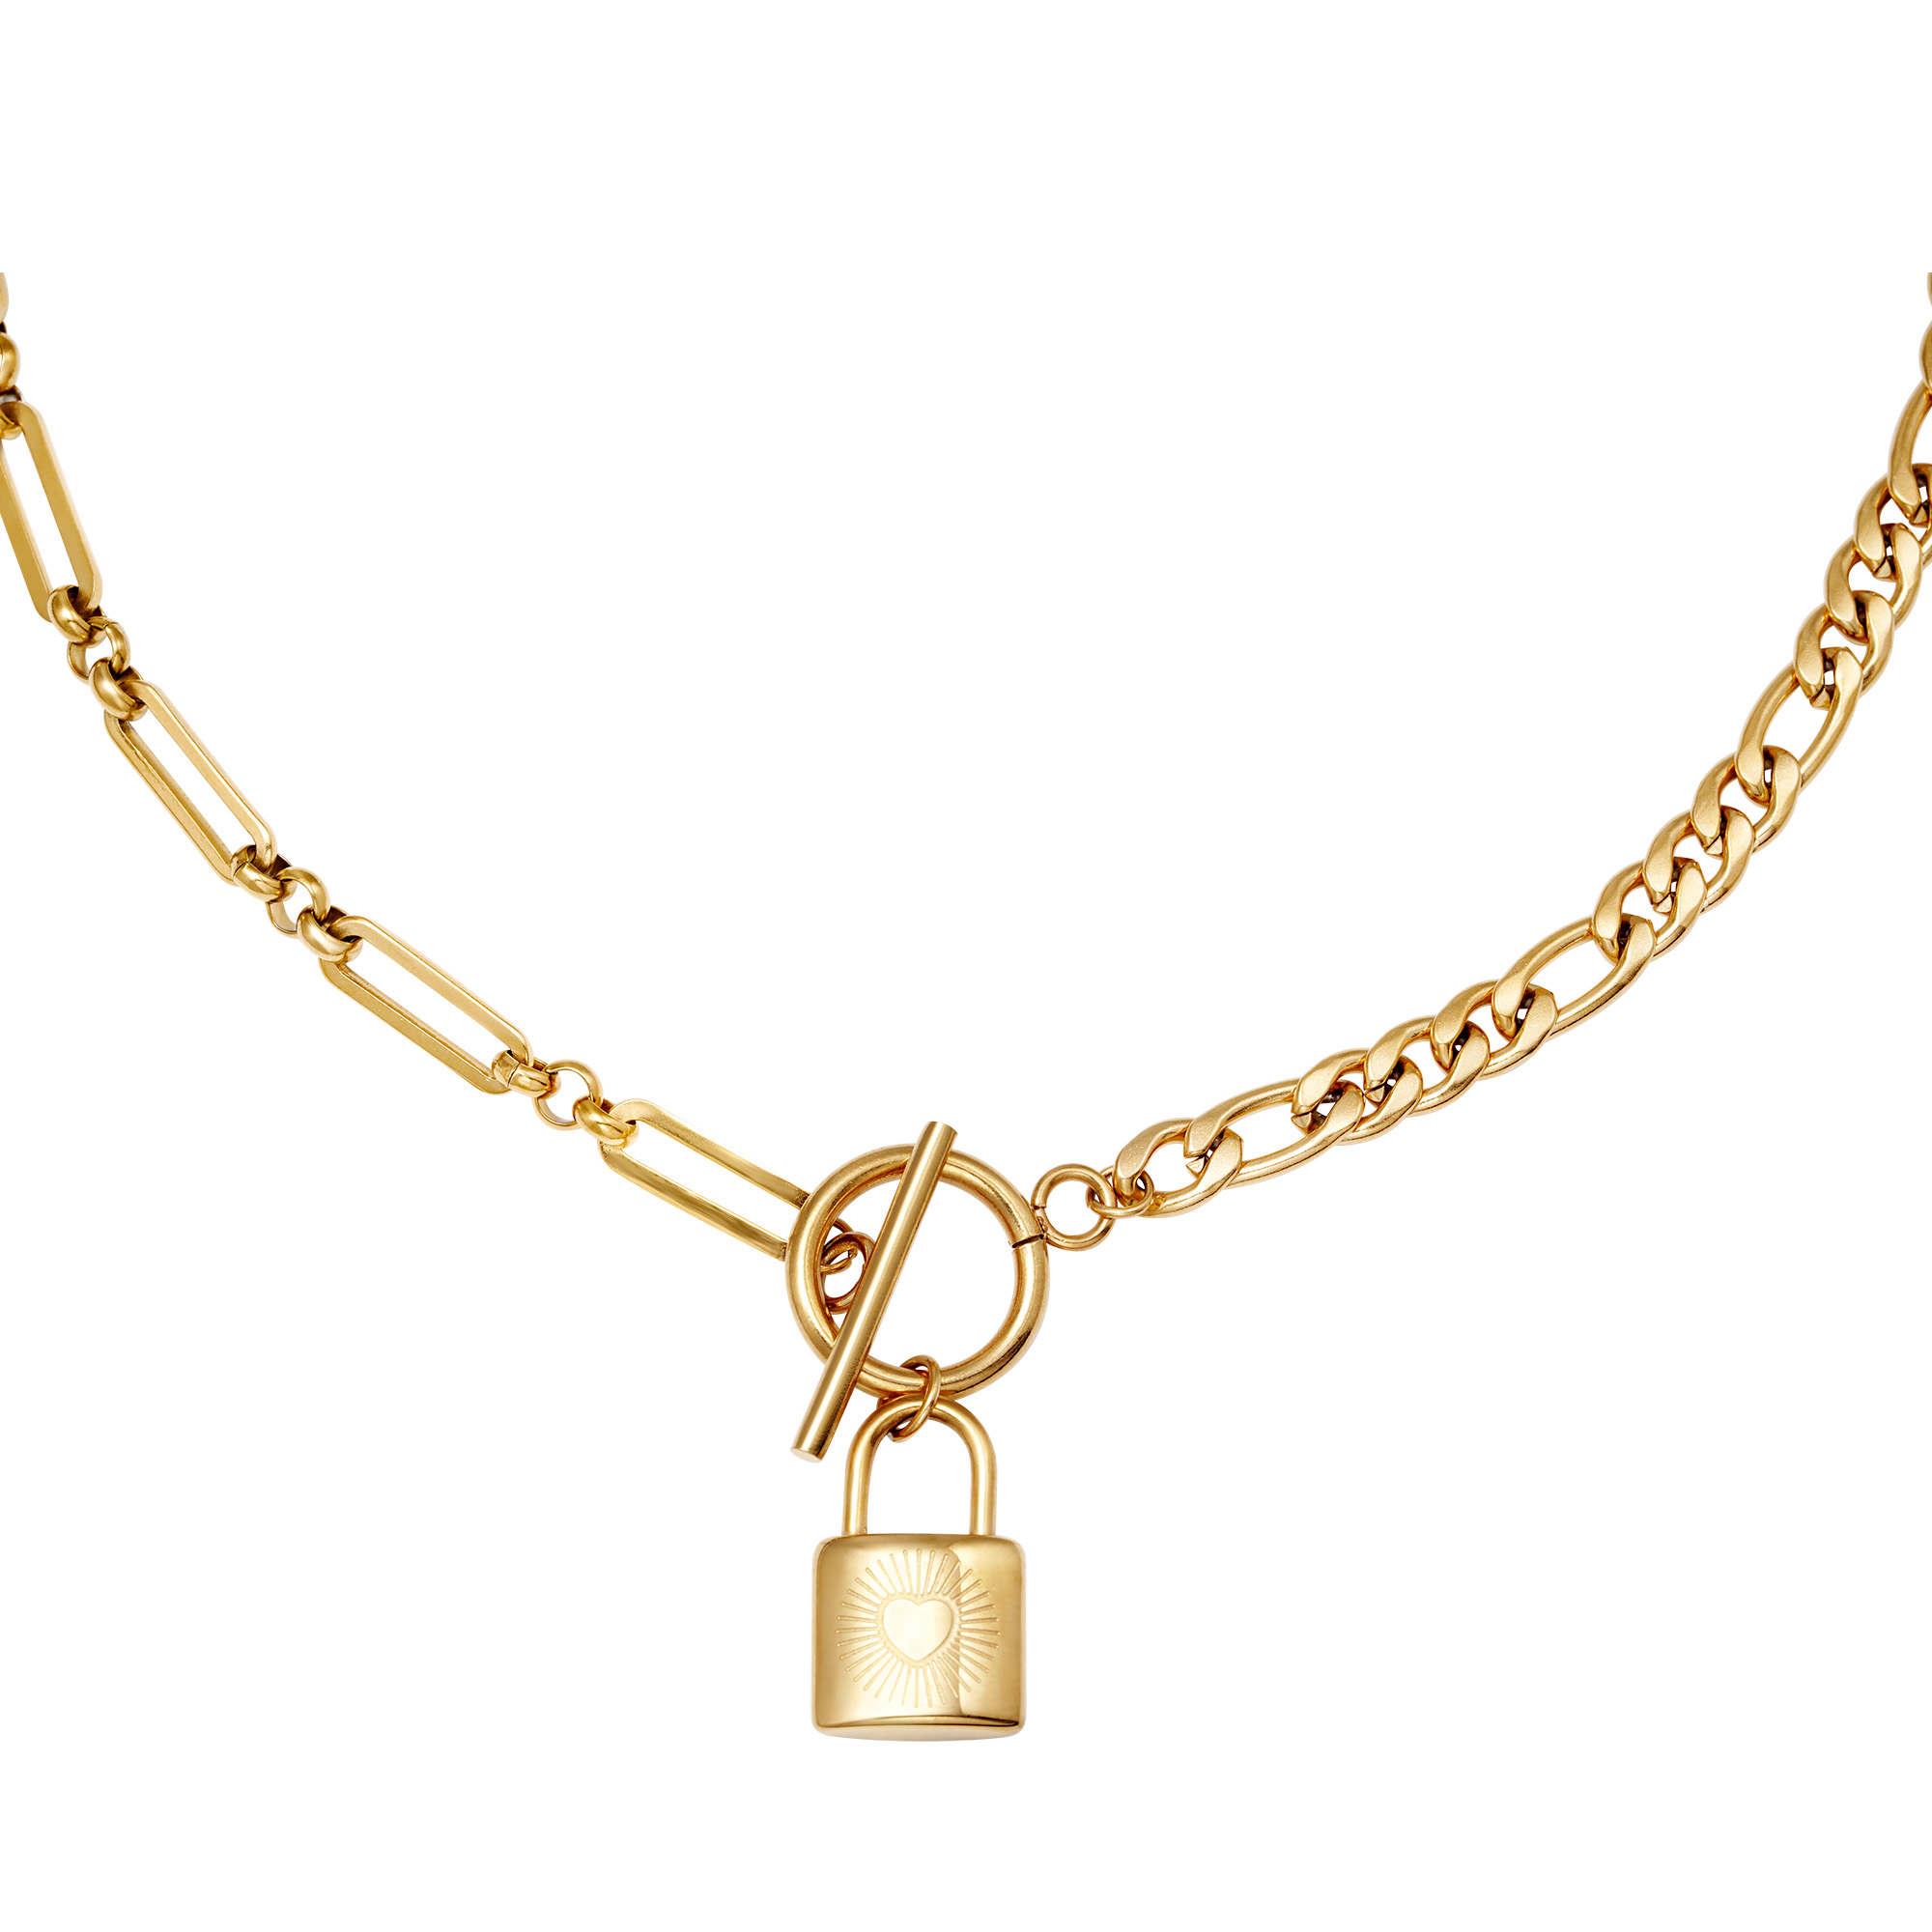 Necklace Chain & Lock h5 